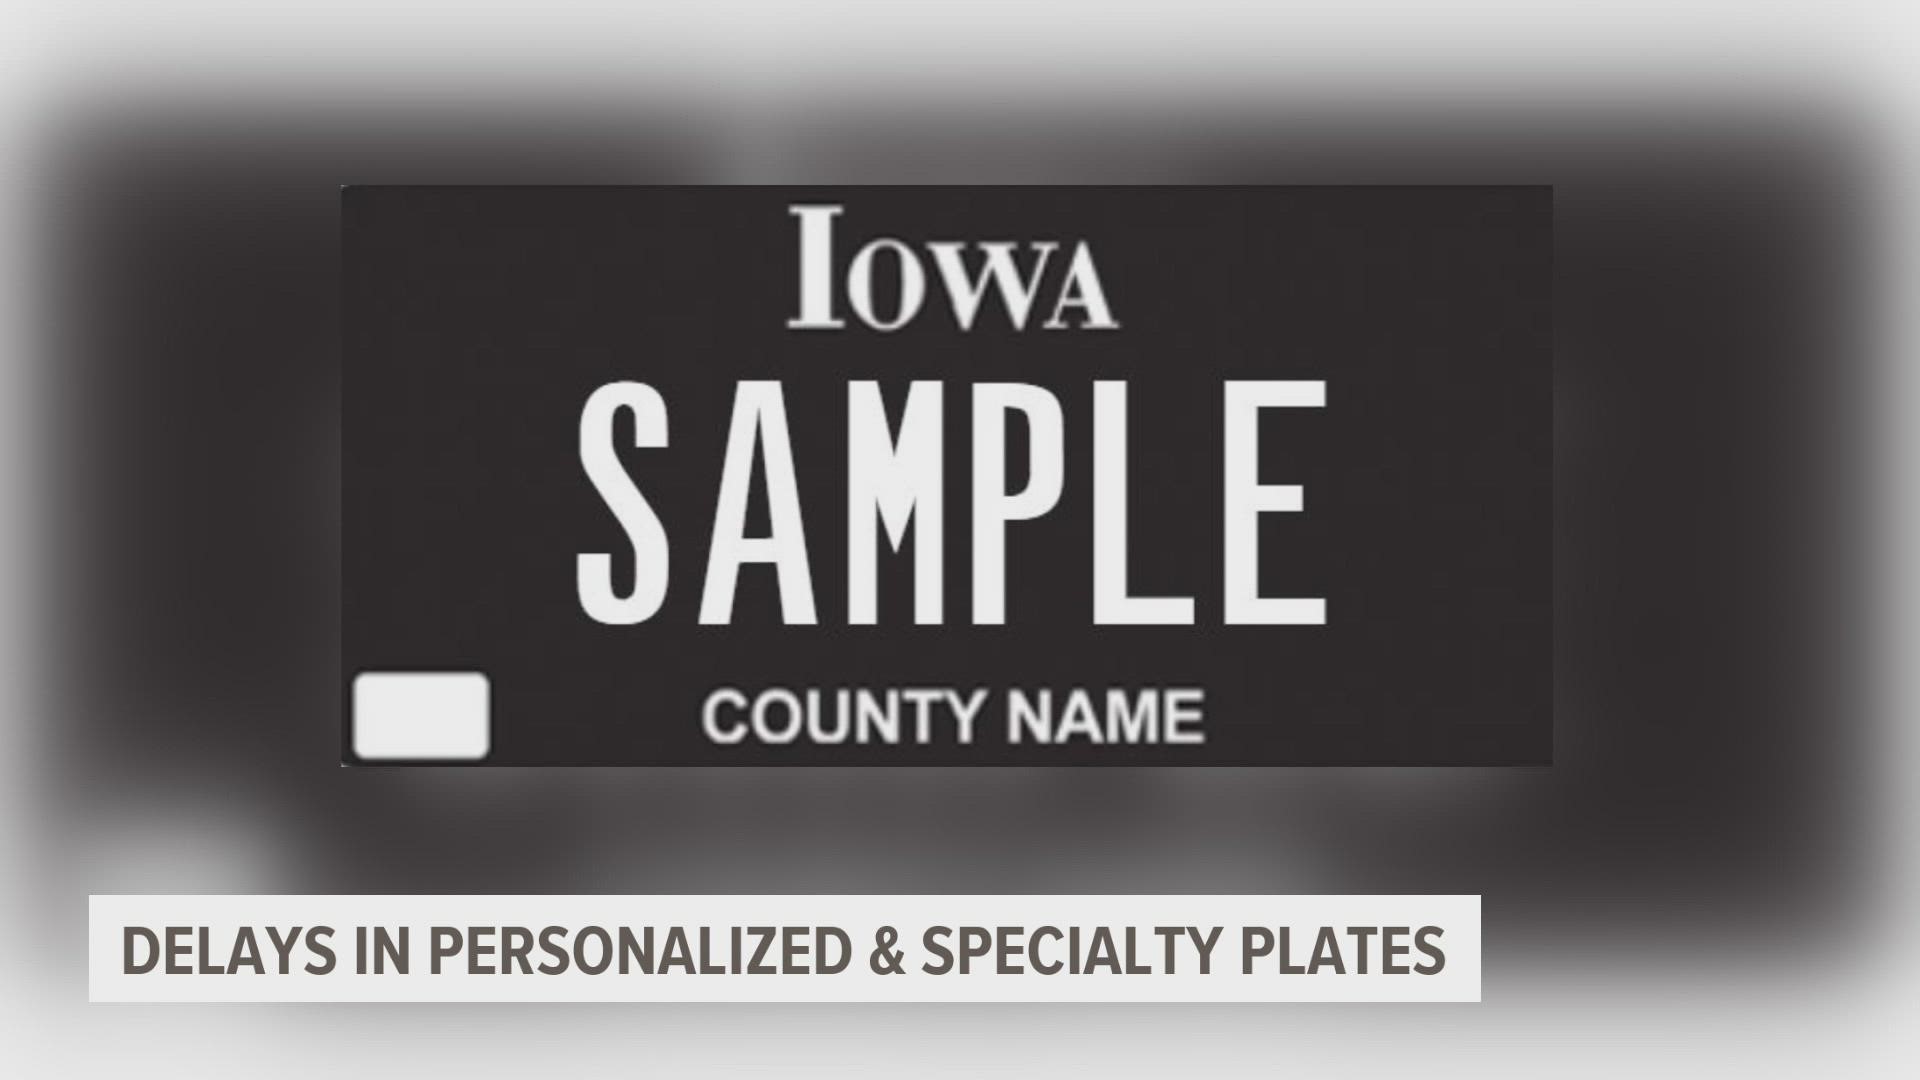 Iowans wanting a brand new personalized plate may have to wait a little while longer to due COVID-19.